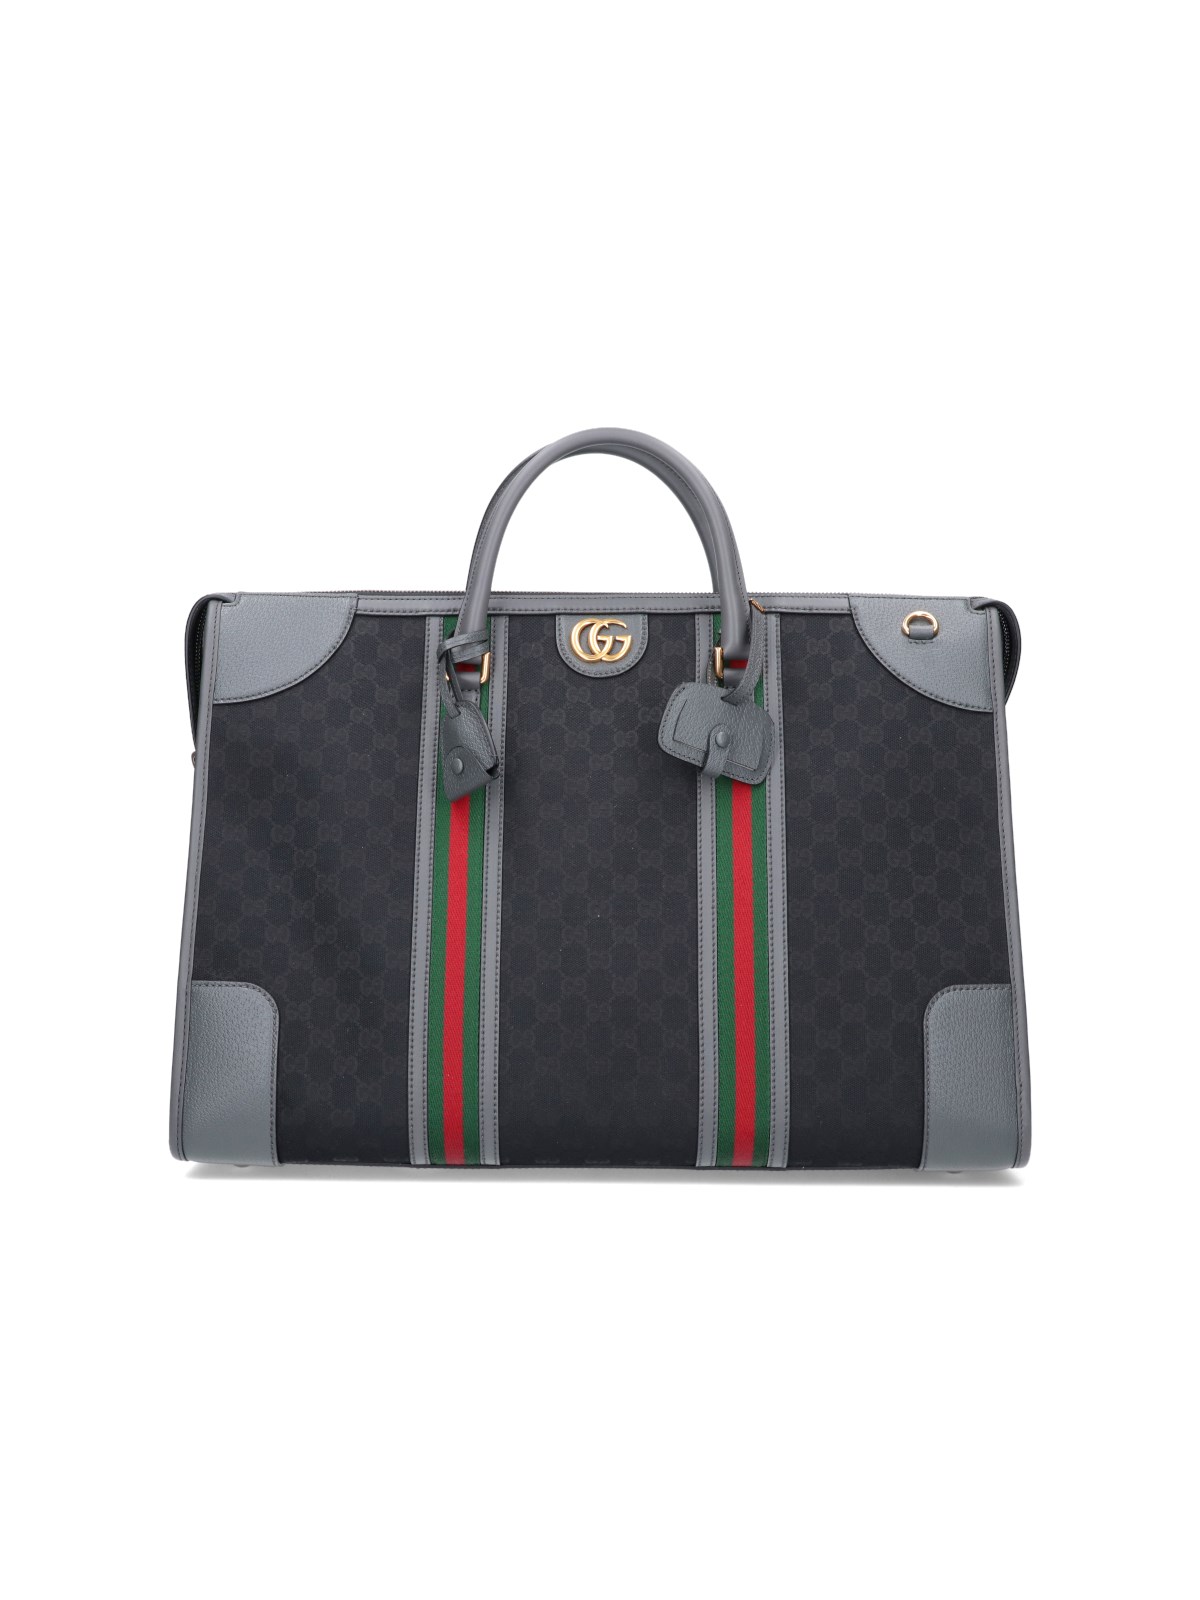 Gucci 'double G' Travel Bag In Nero